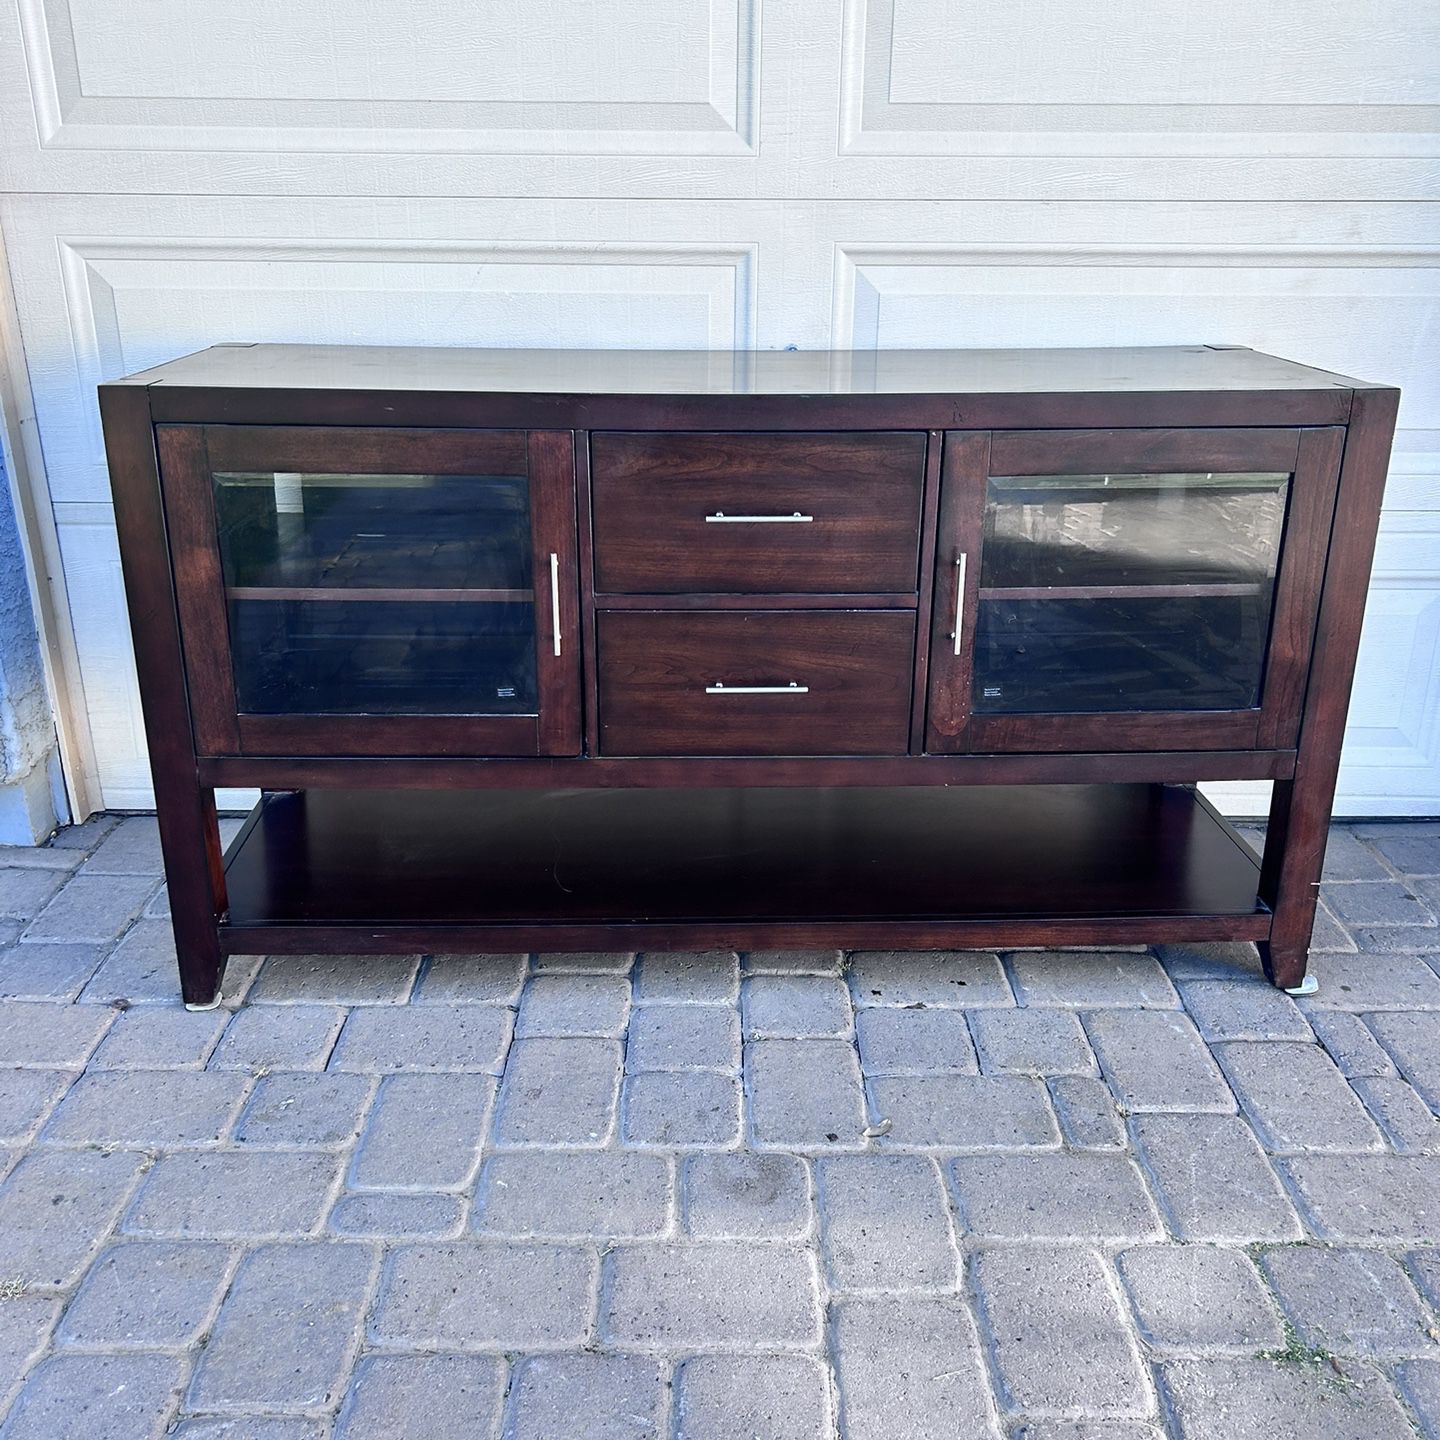 Like New Lerge Entertainment Center - Can Deliver!